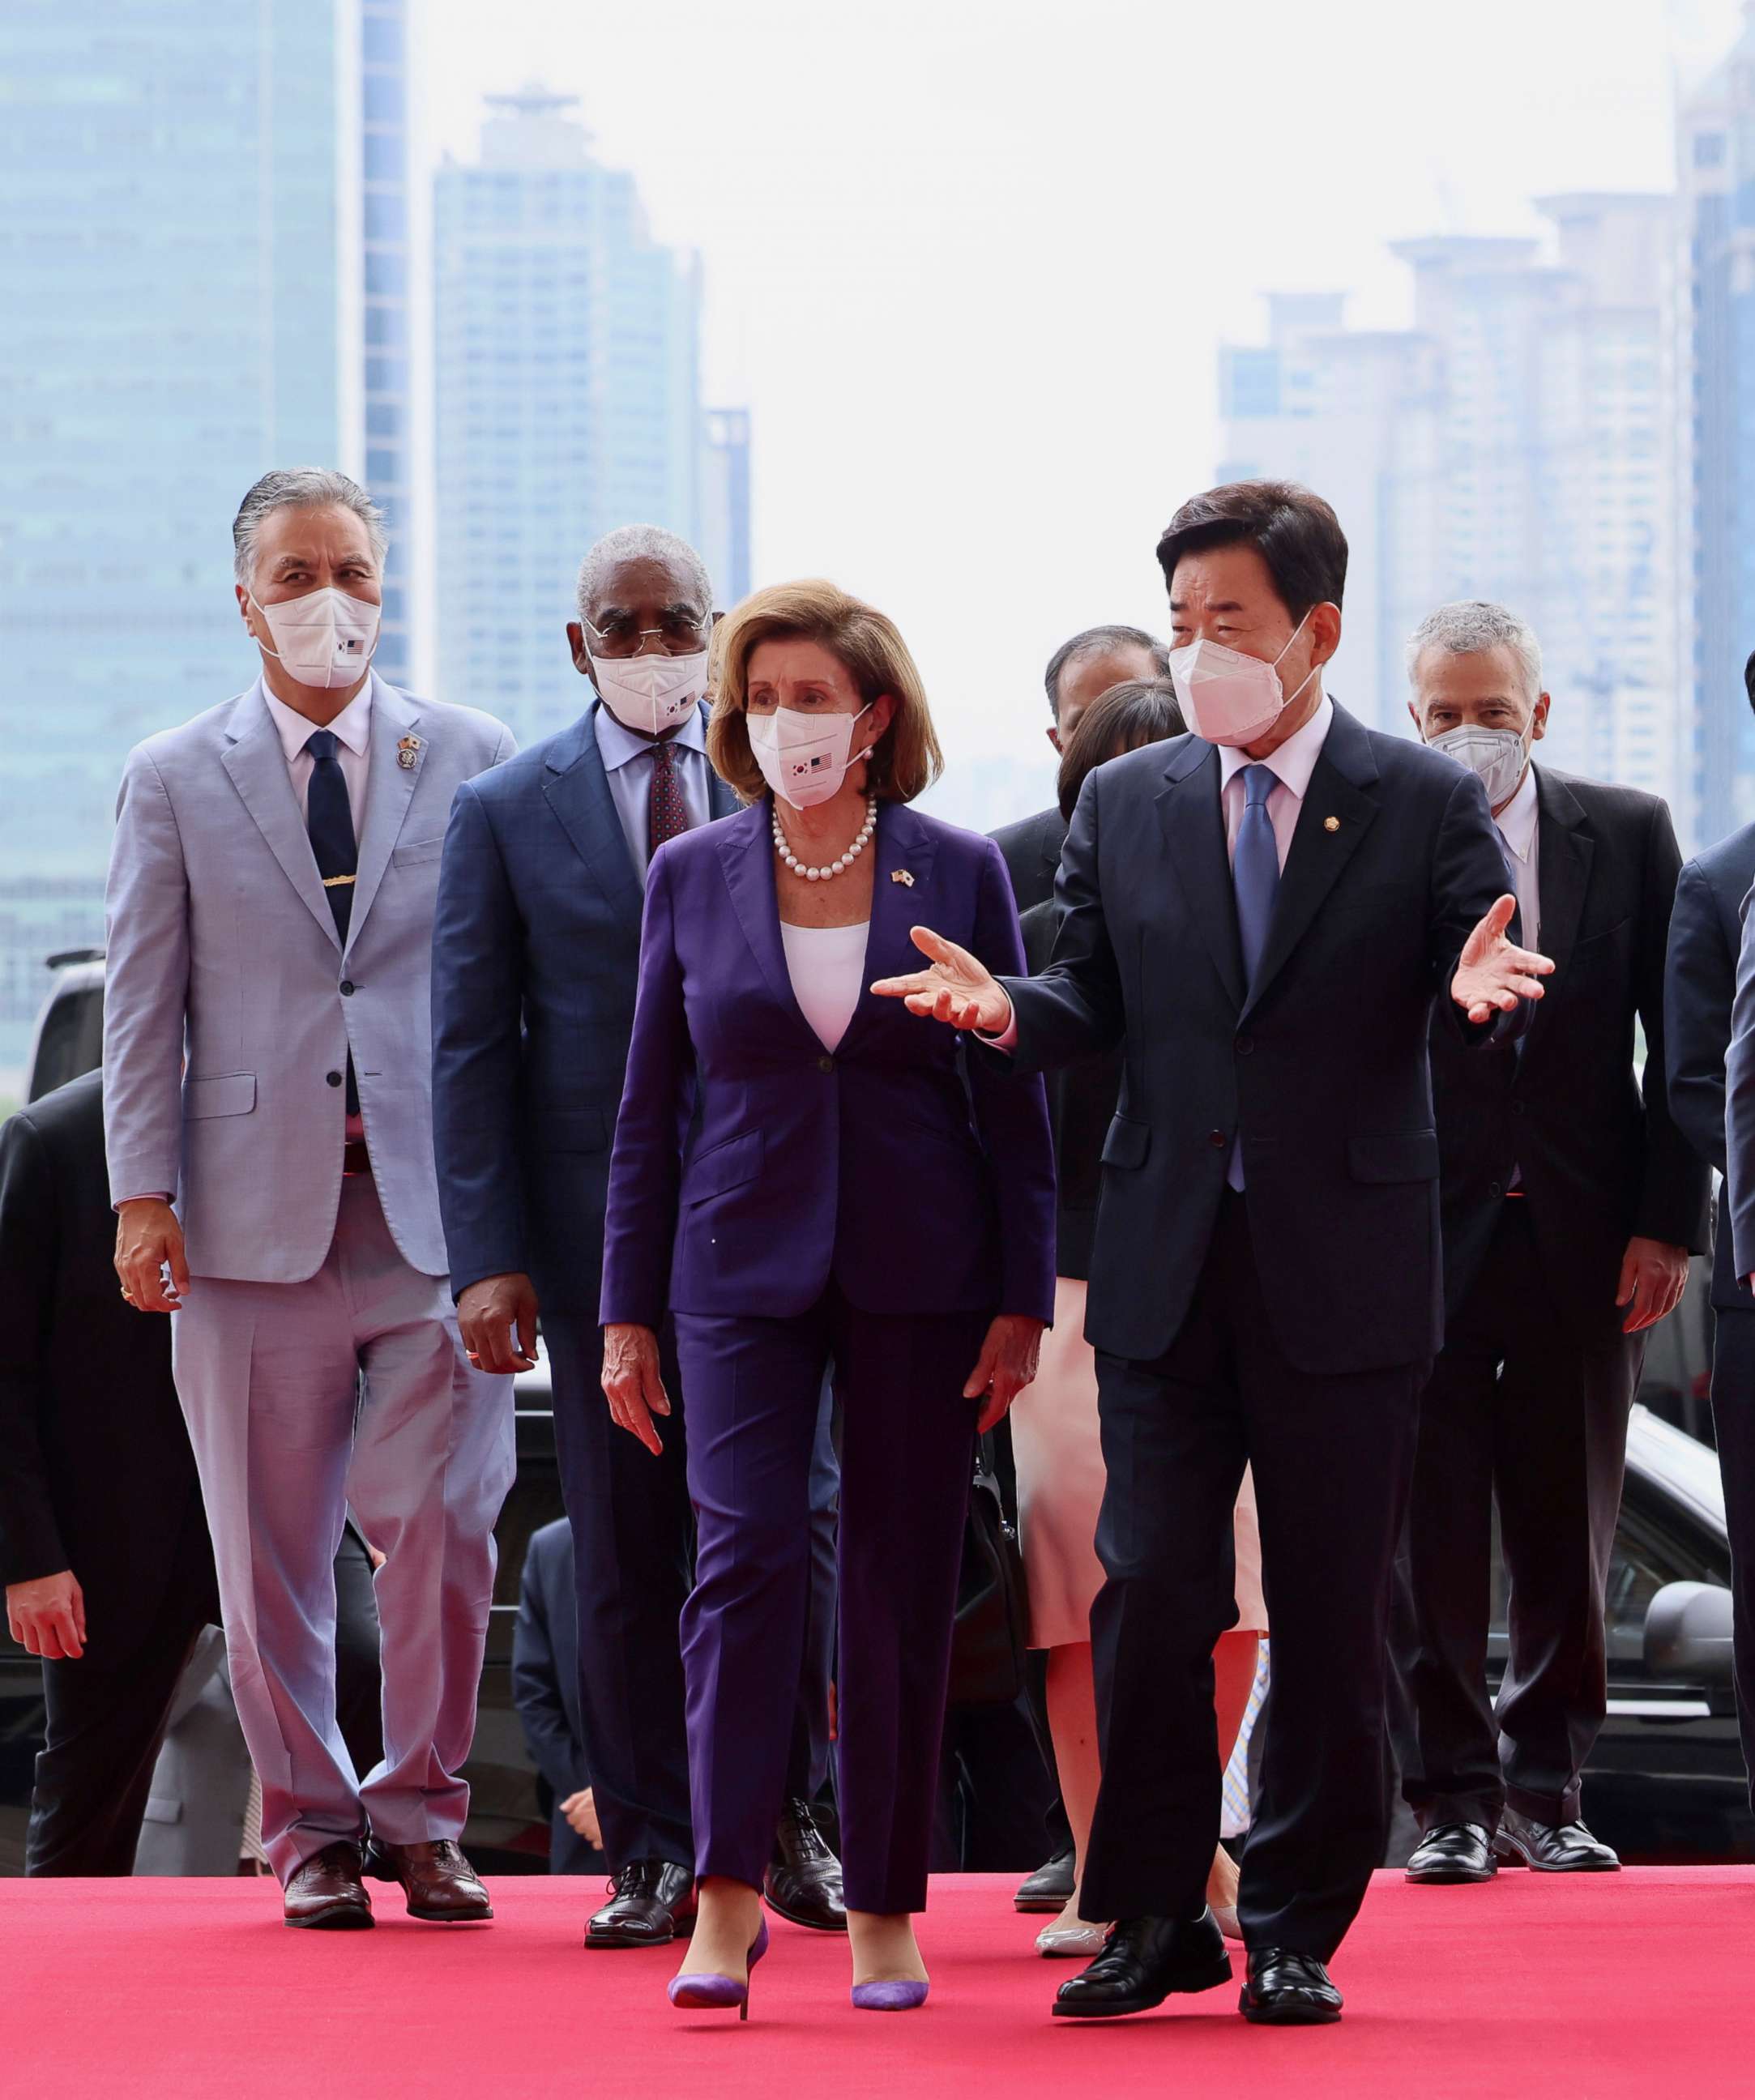 PHOTO: U.S. House Speaker Nancy Pelosi, third from left, is escorted by South Korean National Assembly Speaker Kim Jin Pyo, front right, upon her arrival at the National Assembly in Seoul, South Korea Aug. 4, 2022.